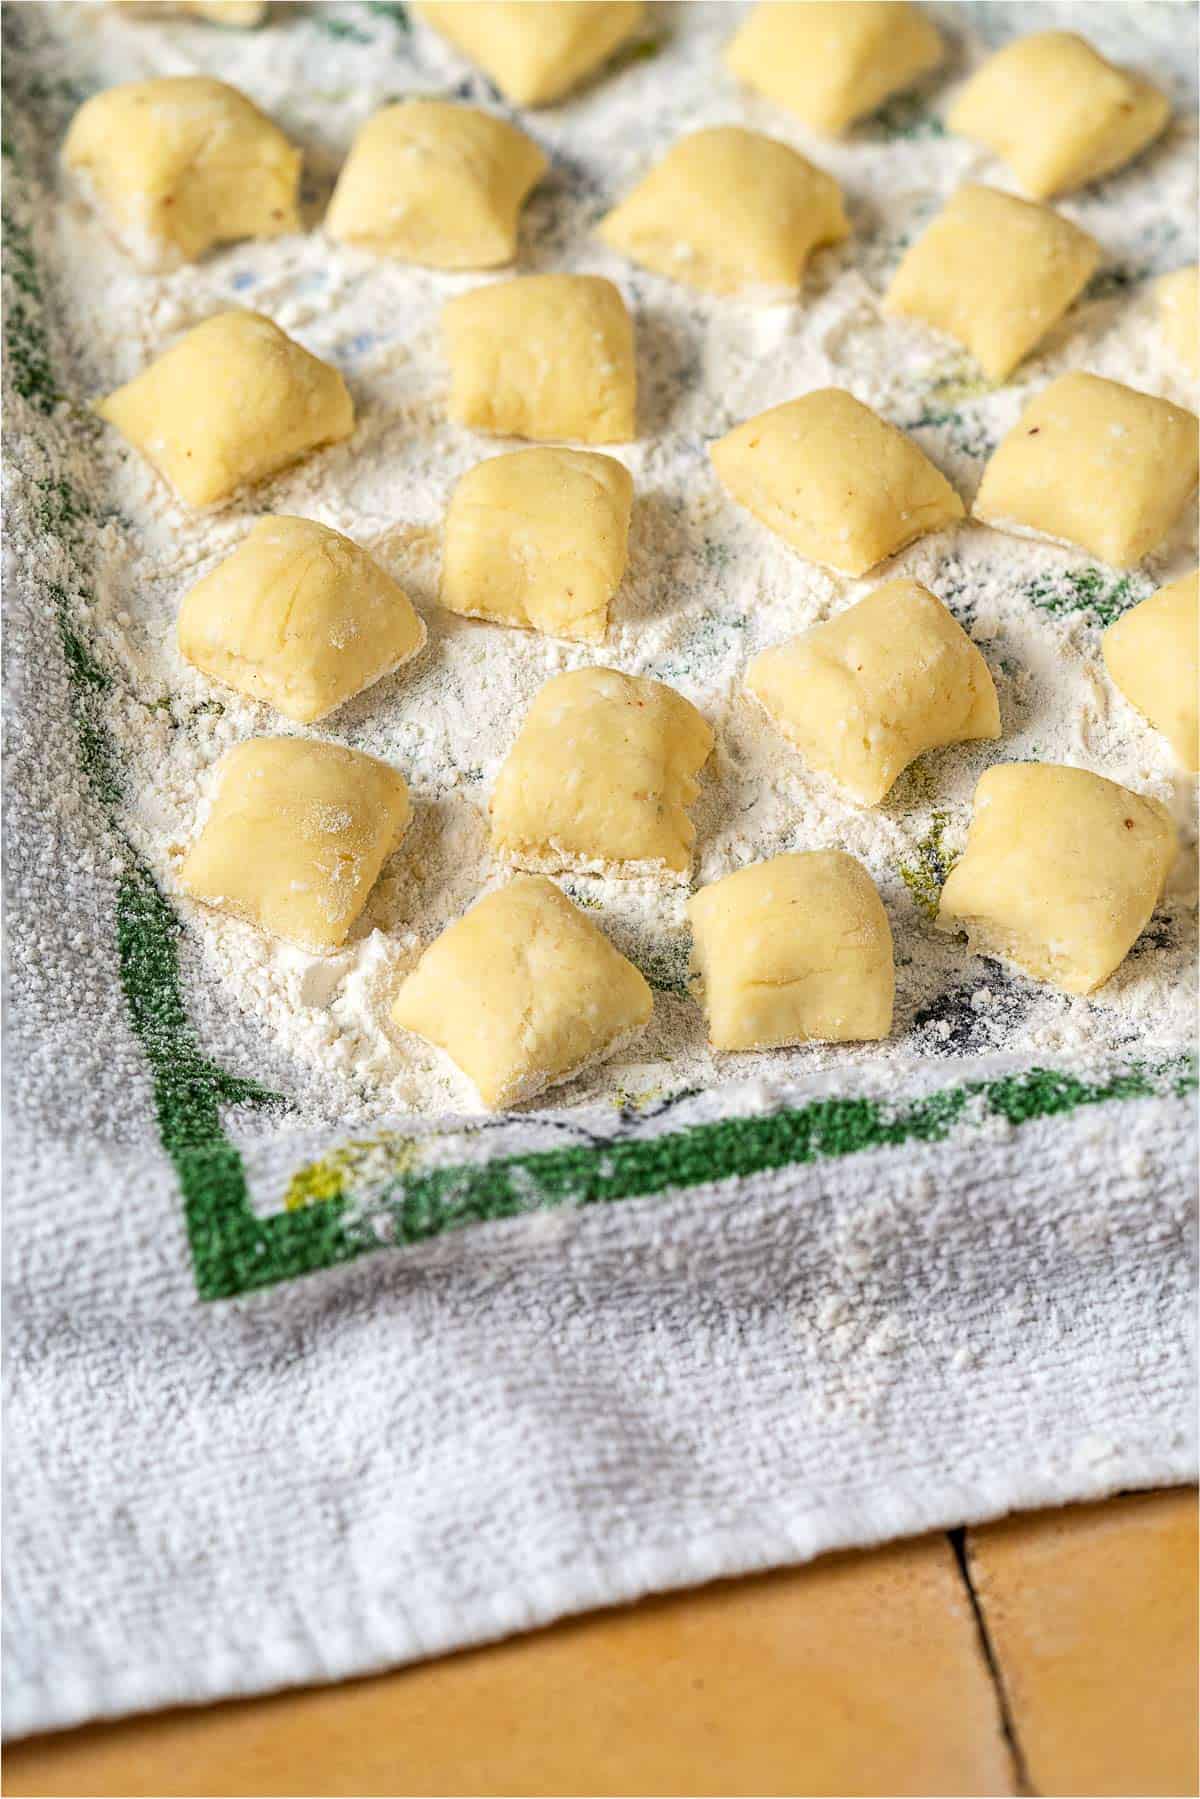 a close up of ricotta gnocchi pieces on a towel sprinkled with flour.